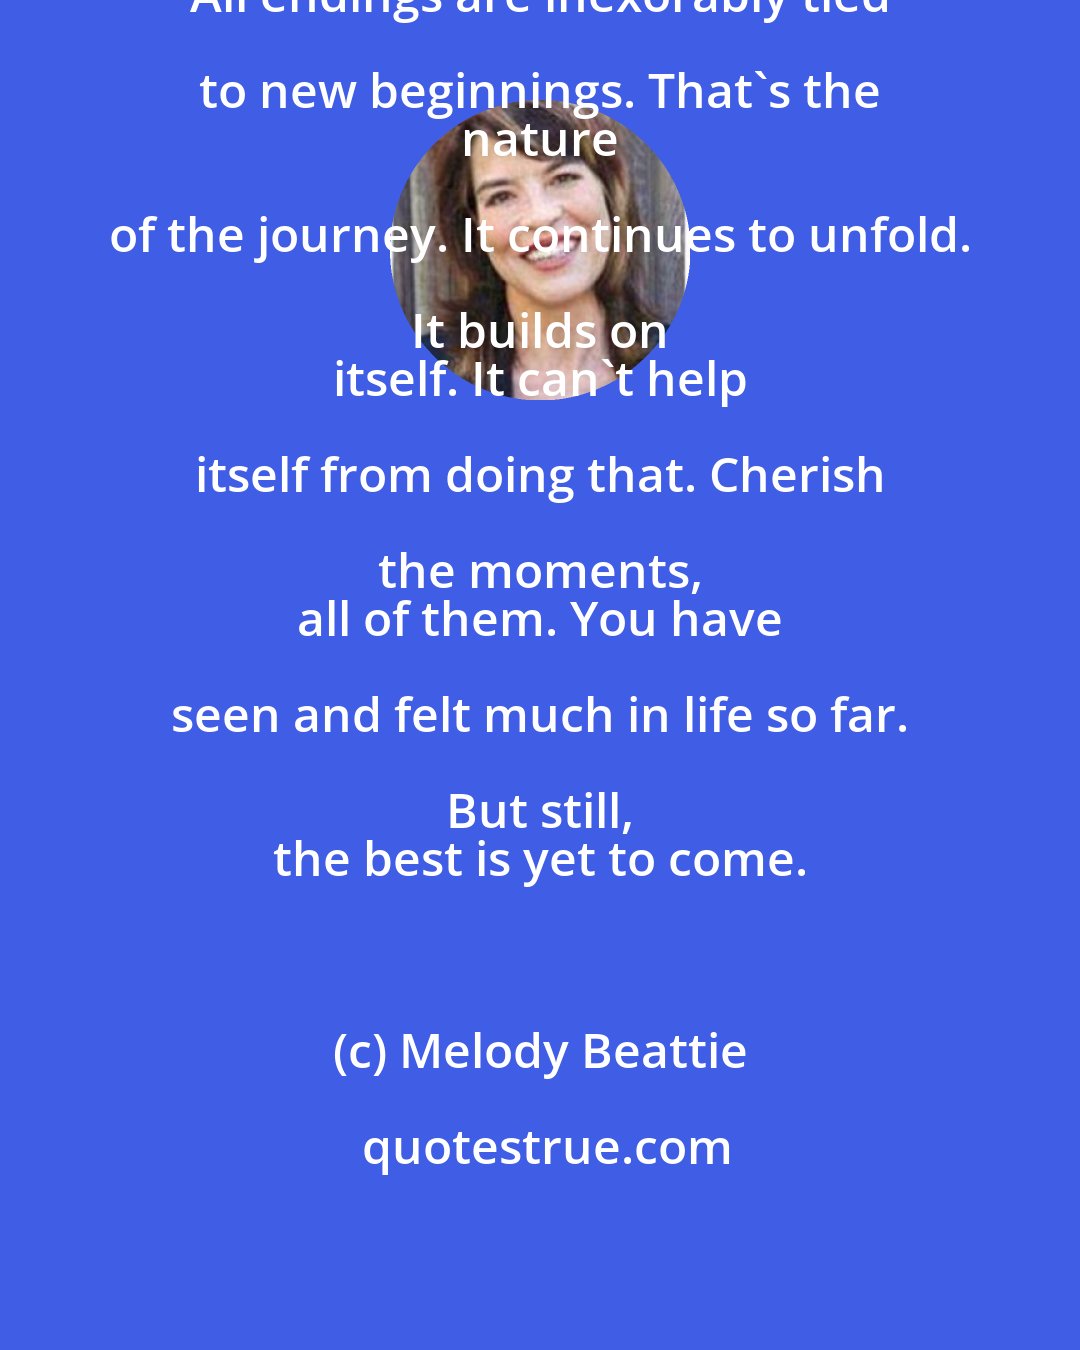 Melody Beattie: All endings are inexorably tied to new beginnings. That's the 
 nature of the journey. It continues to unfold. It builds on 
 itself. It can't help itself from doing that. Cherish the moments, 
 all of them. You have seen and felt much in life so far. But still, 
 the best is yet to come.